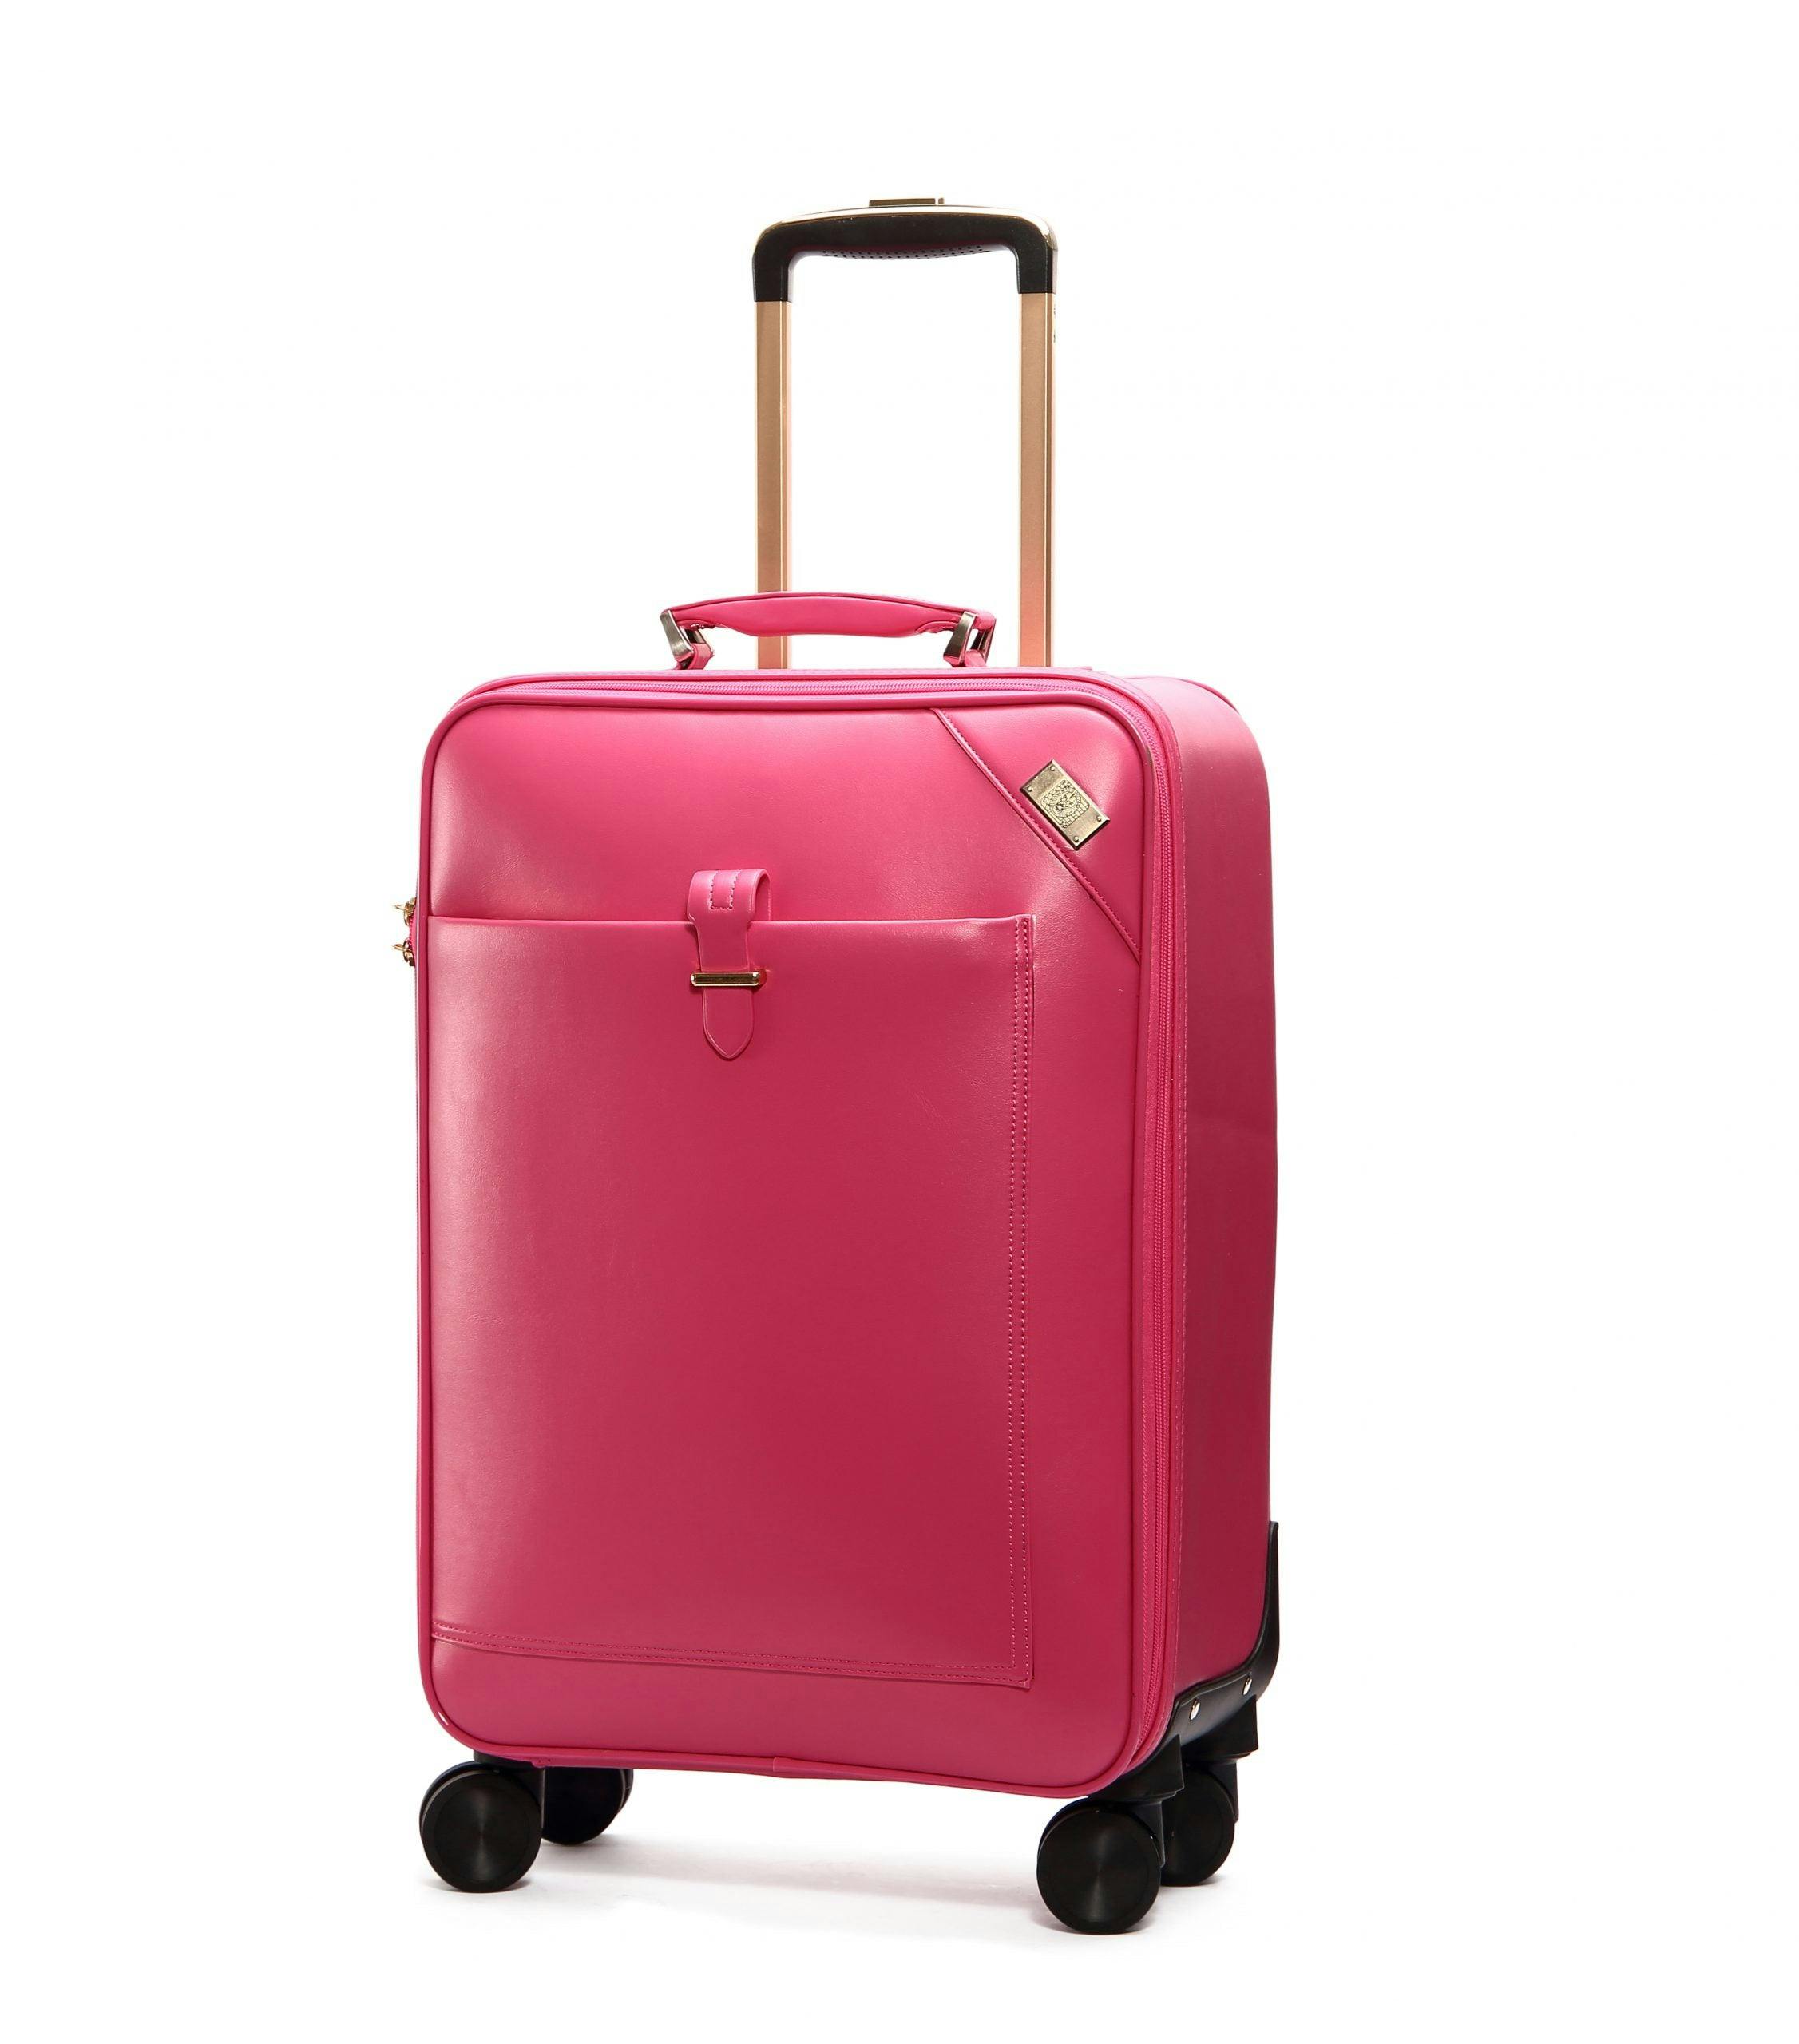 SEMMS HOT PINK LUXURIOUS LEATHER LUGGAGE